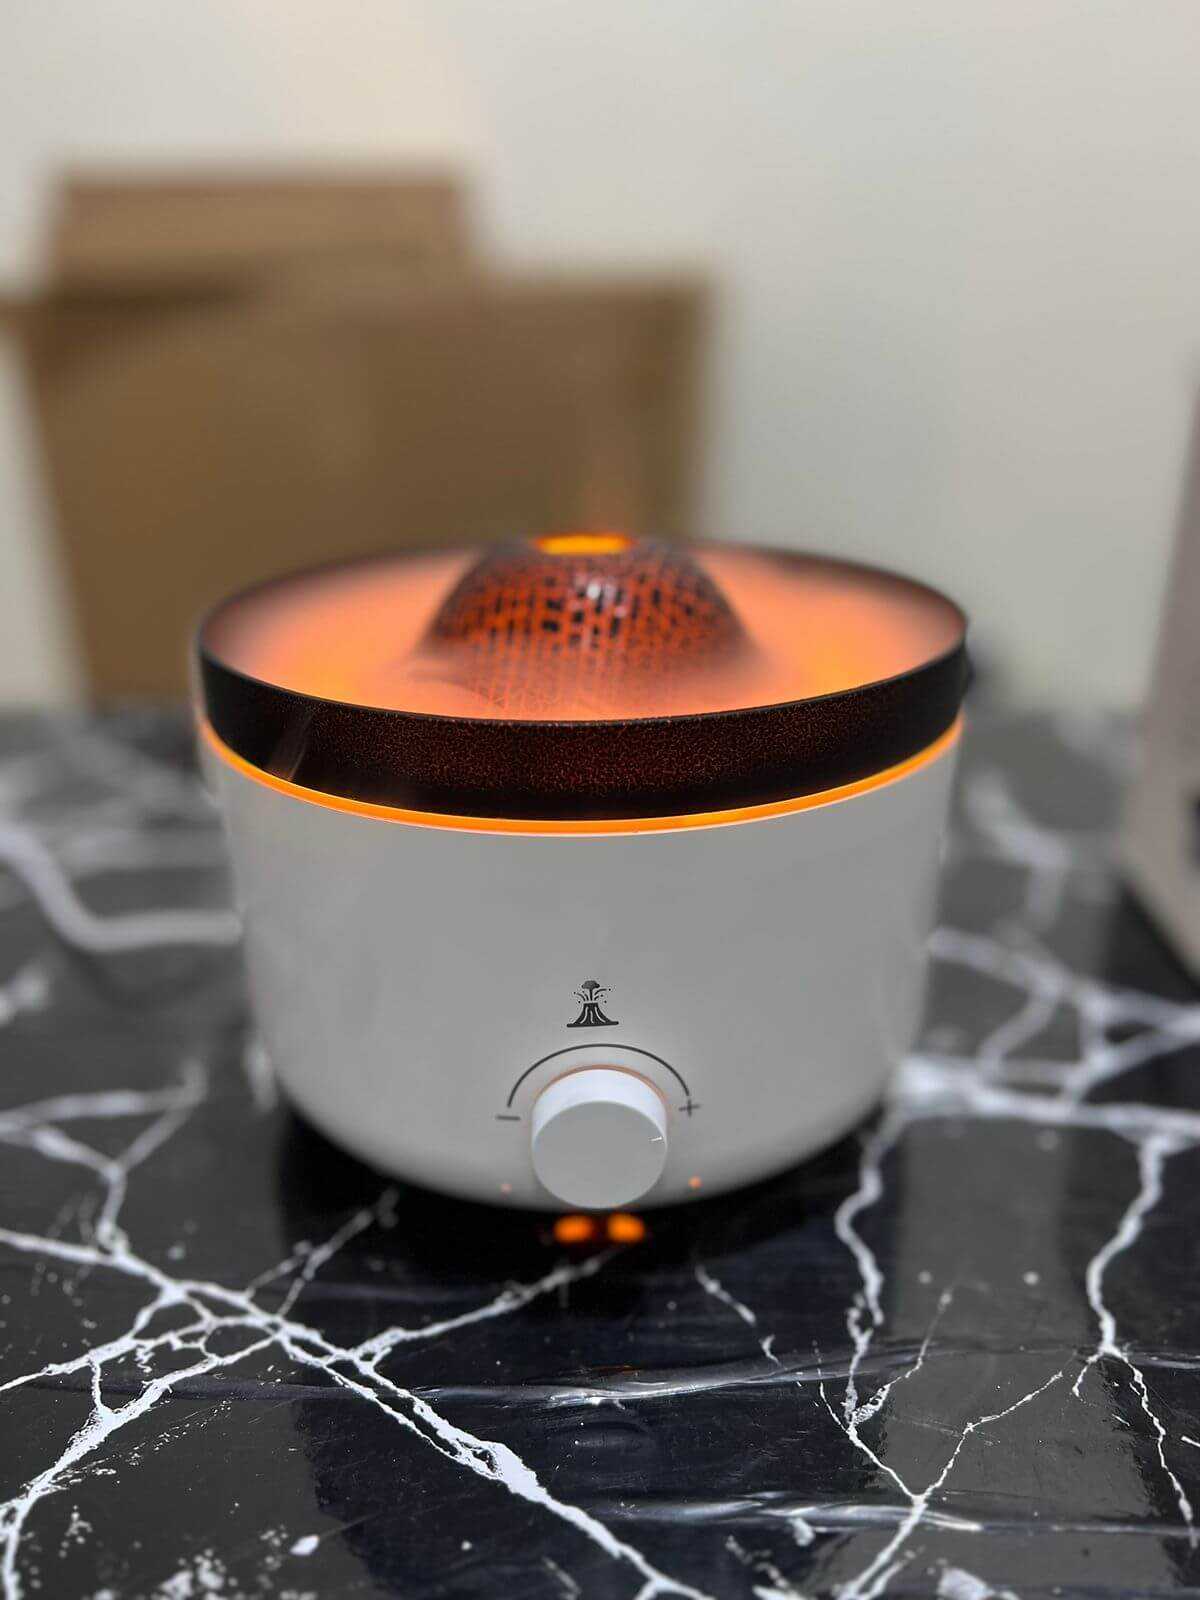 Lot Imported Volcano Aromatherapy Machine Humidifier Air Diffuser Ultrasonic